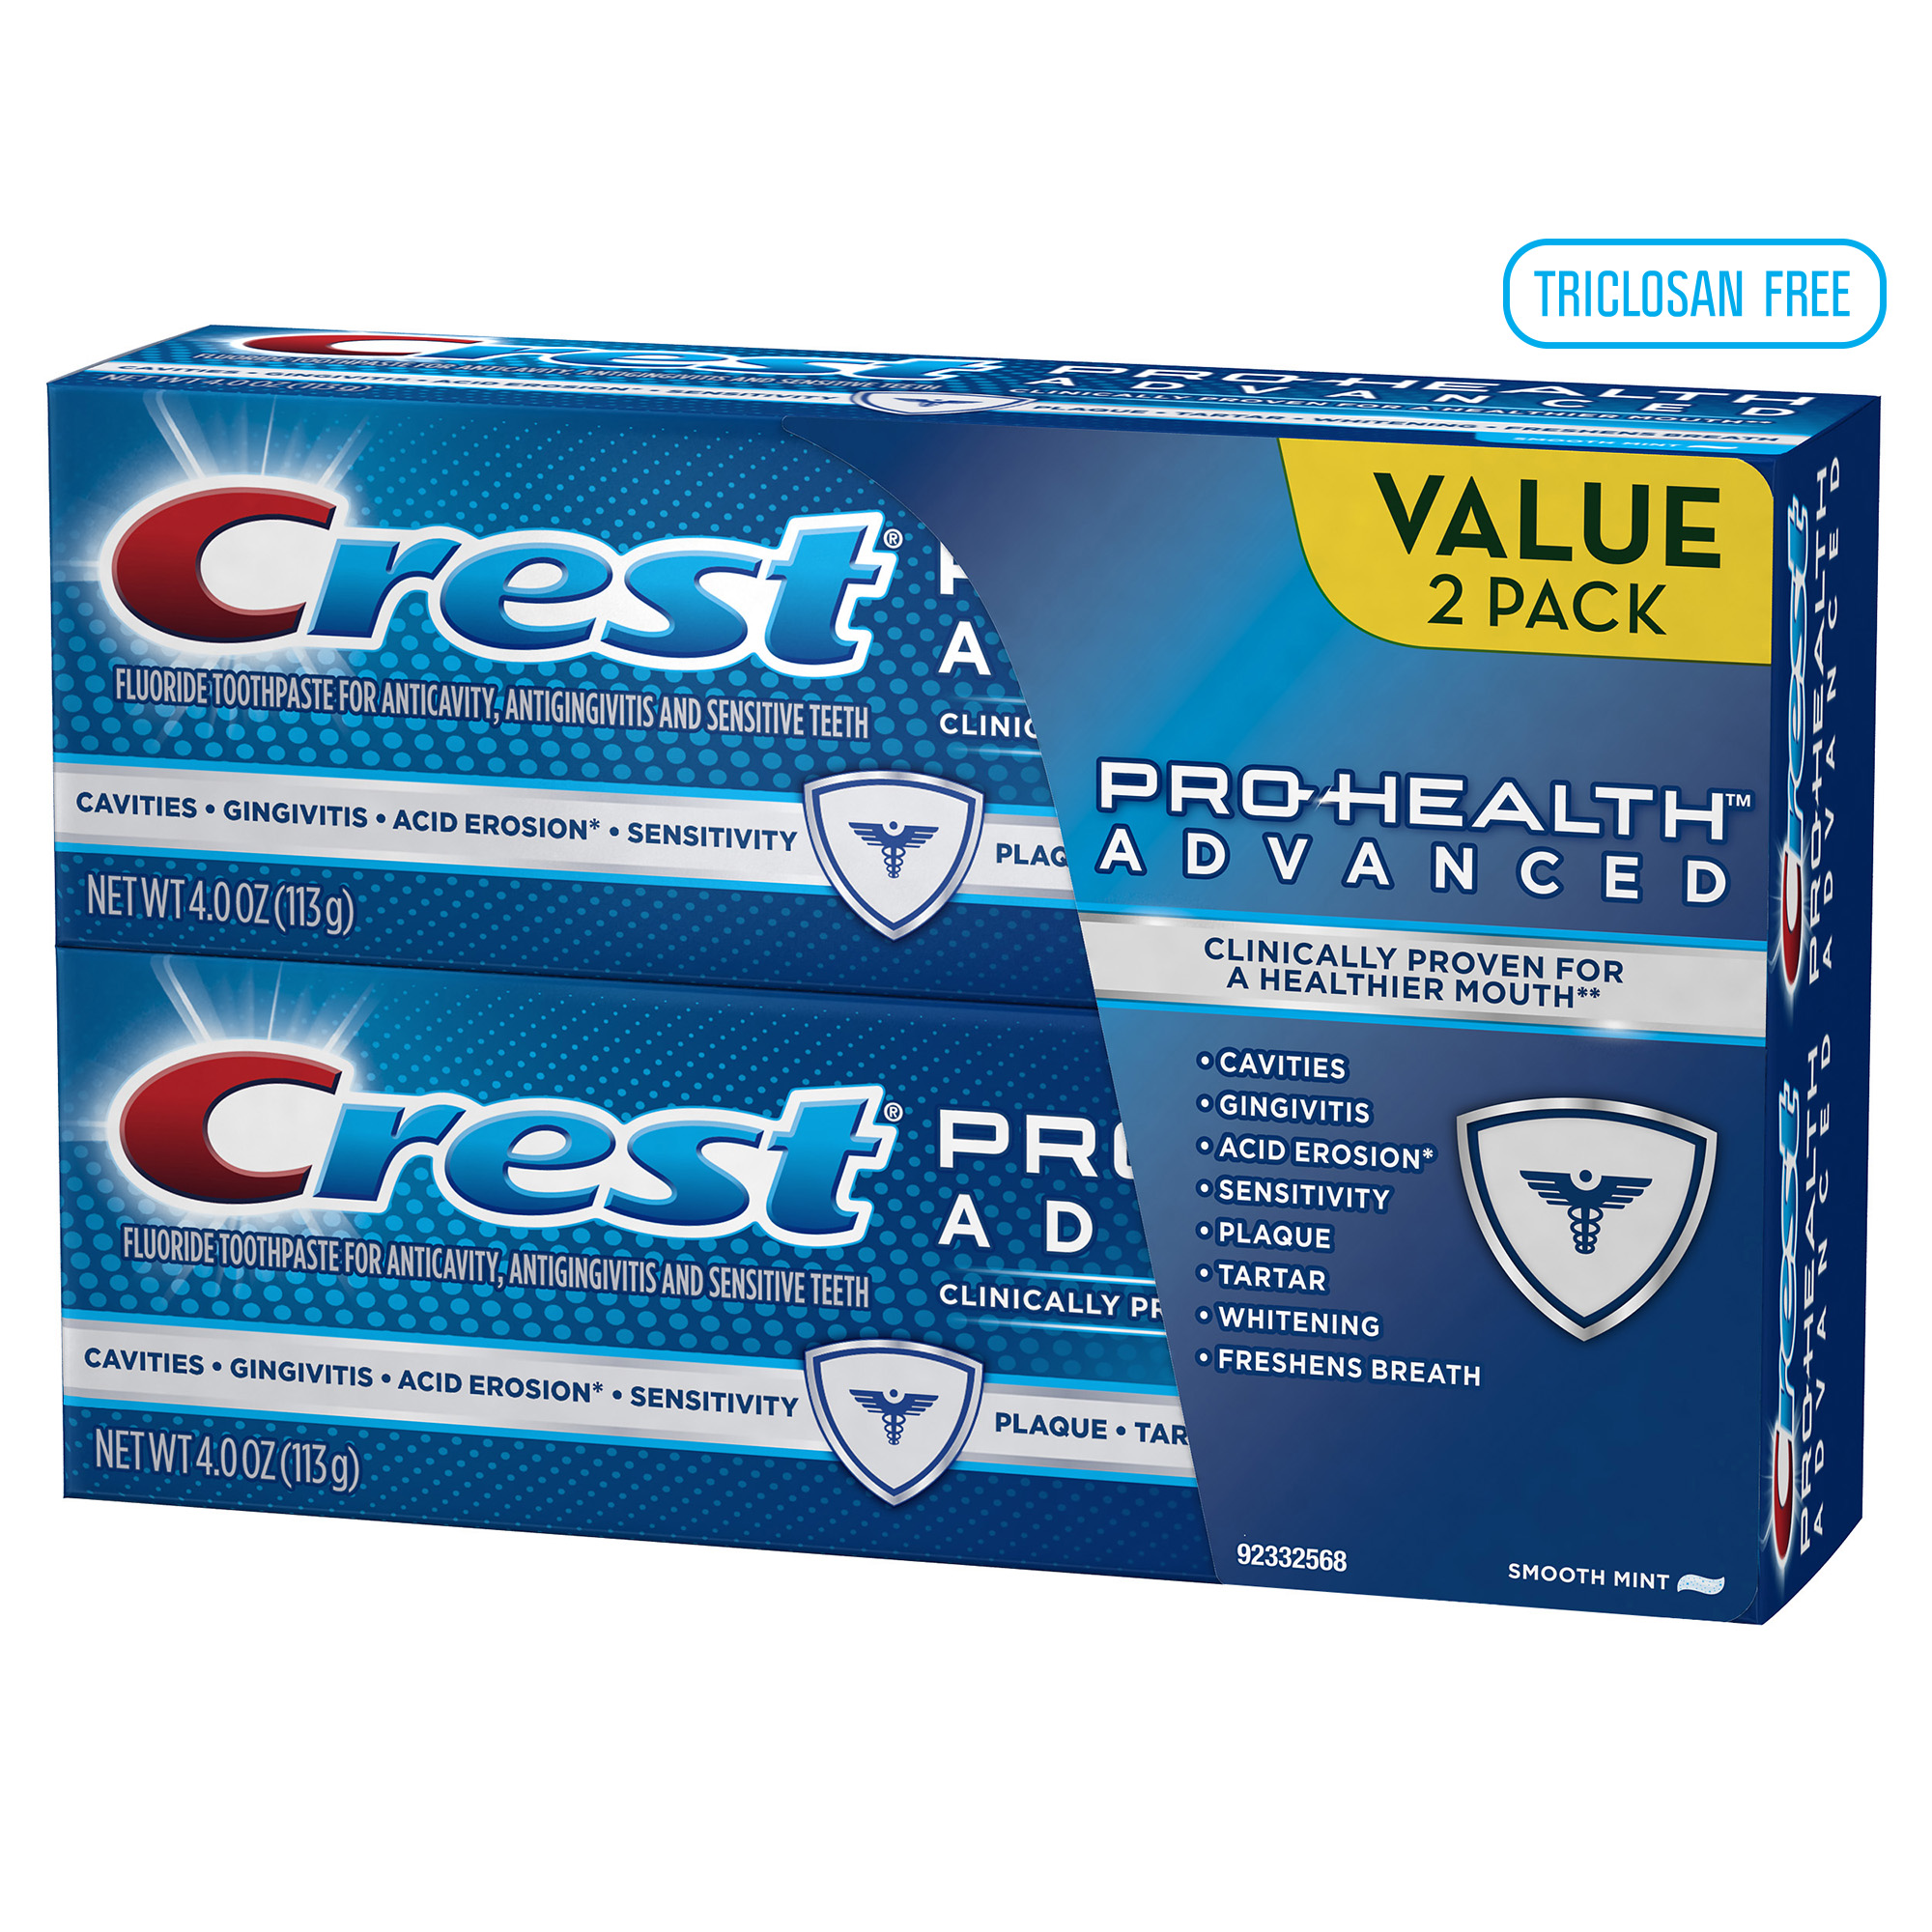 Crest Pro-Health Advanced Soothing Smooth Mint Toothpaste 8.0 oz. 2 Count - image 9 of 9